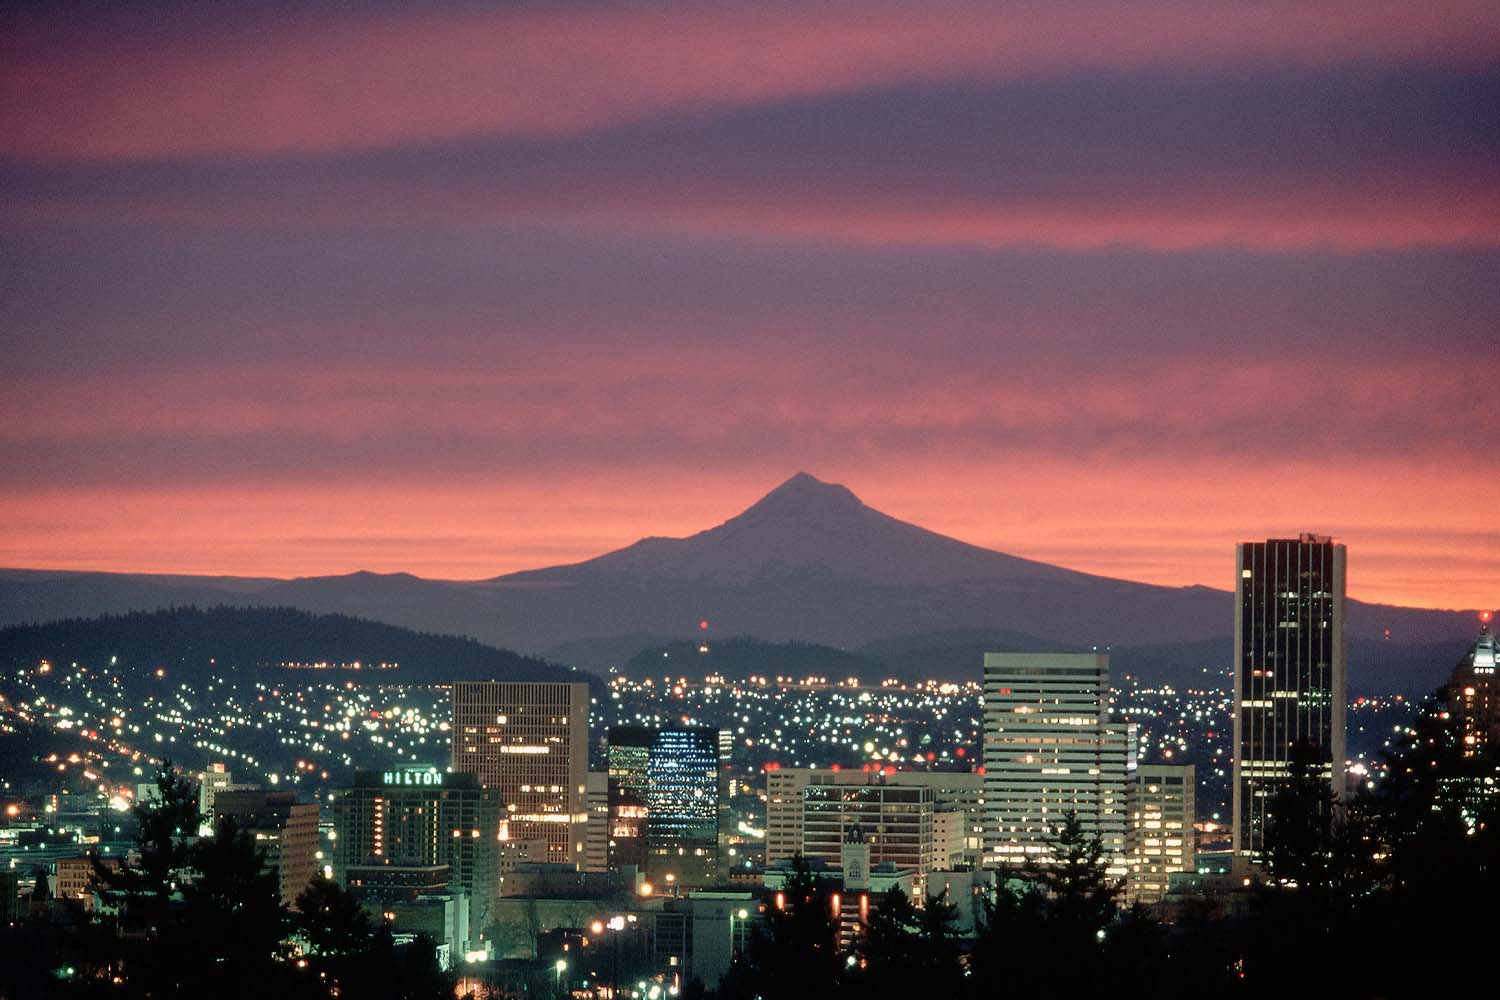 The sunrise casts a rosy glow over the city of Portland and Mount Hood.